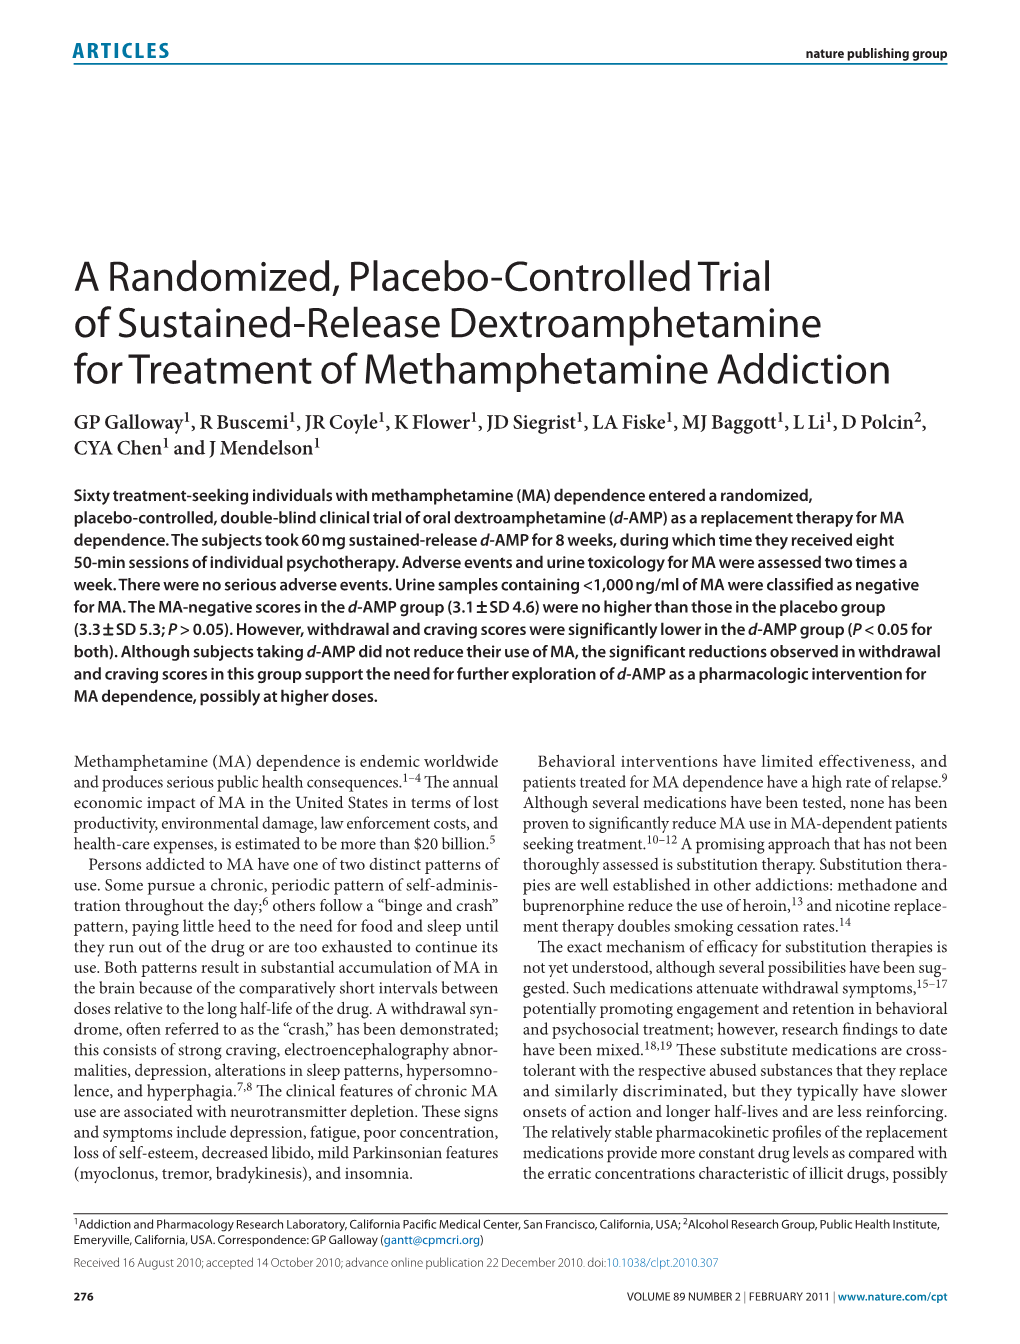 A Randomized, Placebo-Controlled Trial of Sustained-Release Dextroamphetamine for Treatment of Methamphetamine Addiction